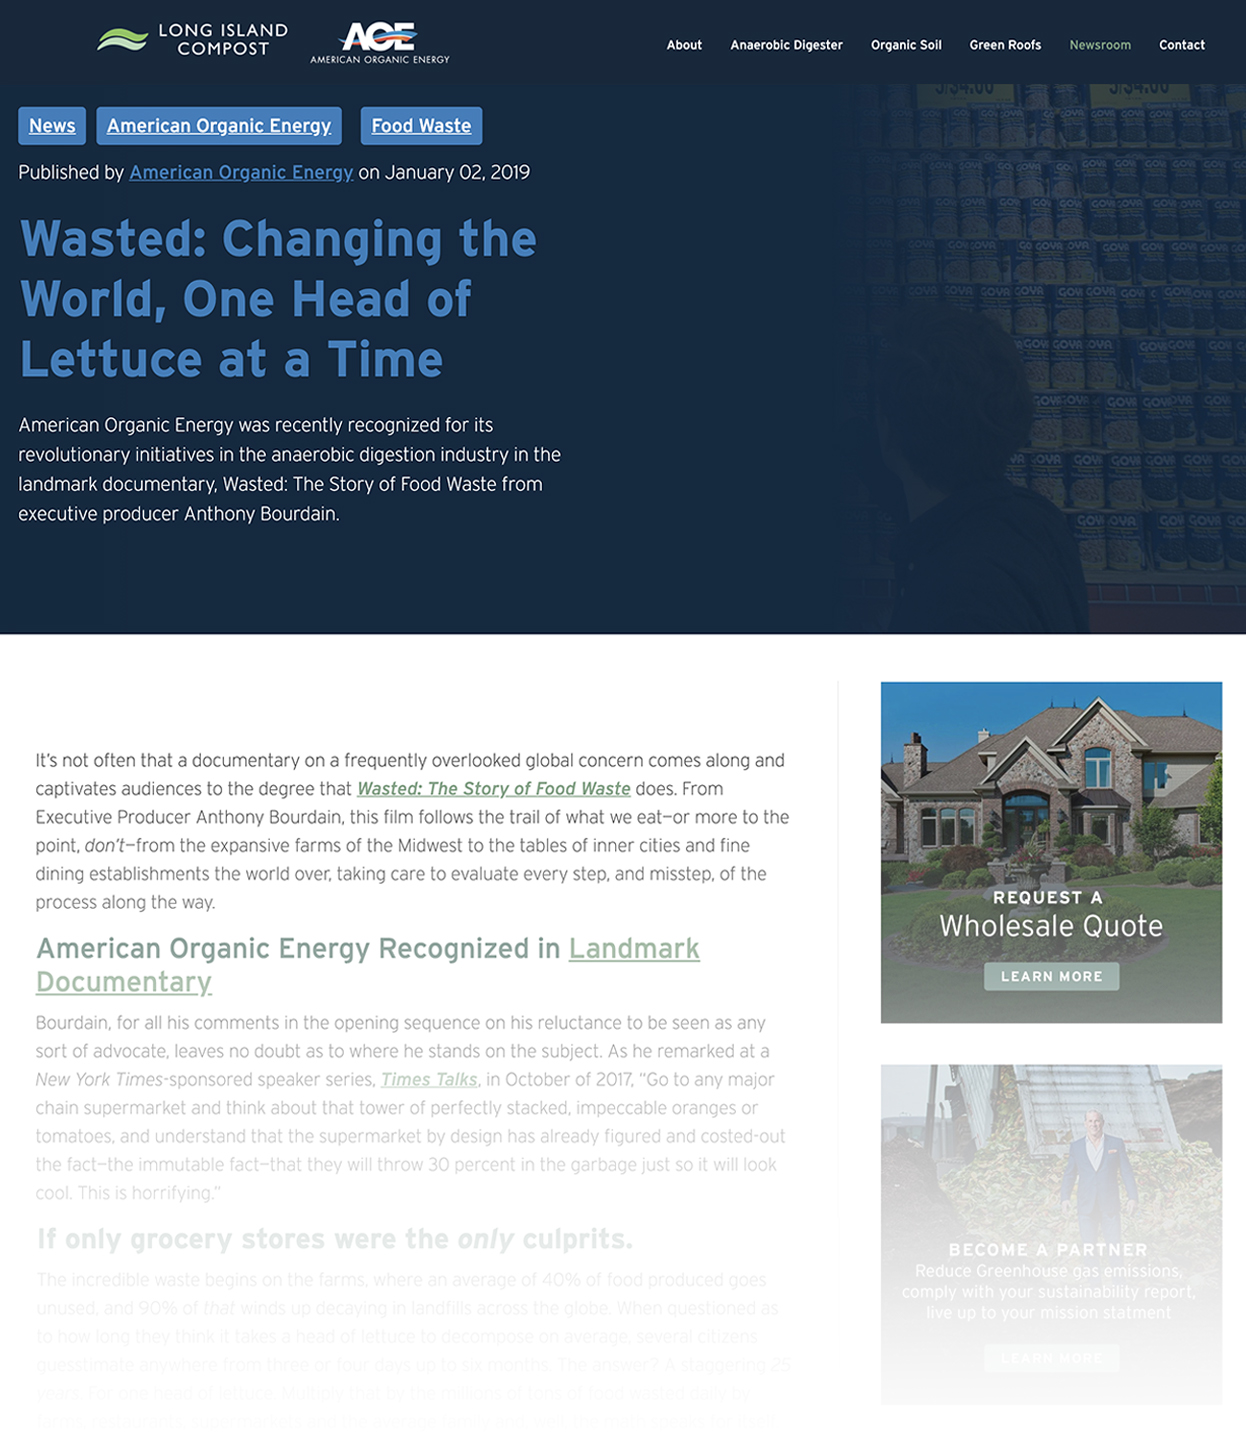 Screenshot of American Organic Energy Blog Called Wasted-Changing the World, One Head of Lettuce at a Time